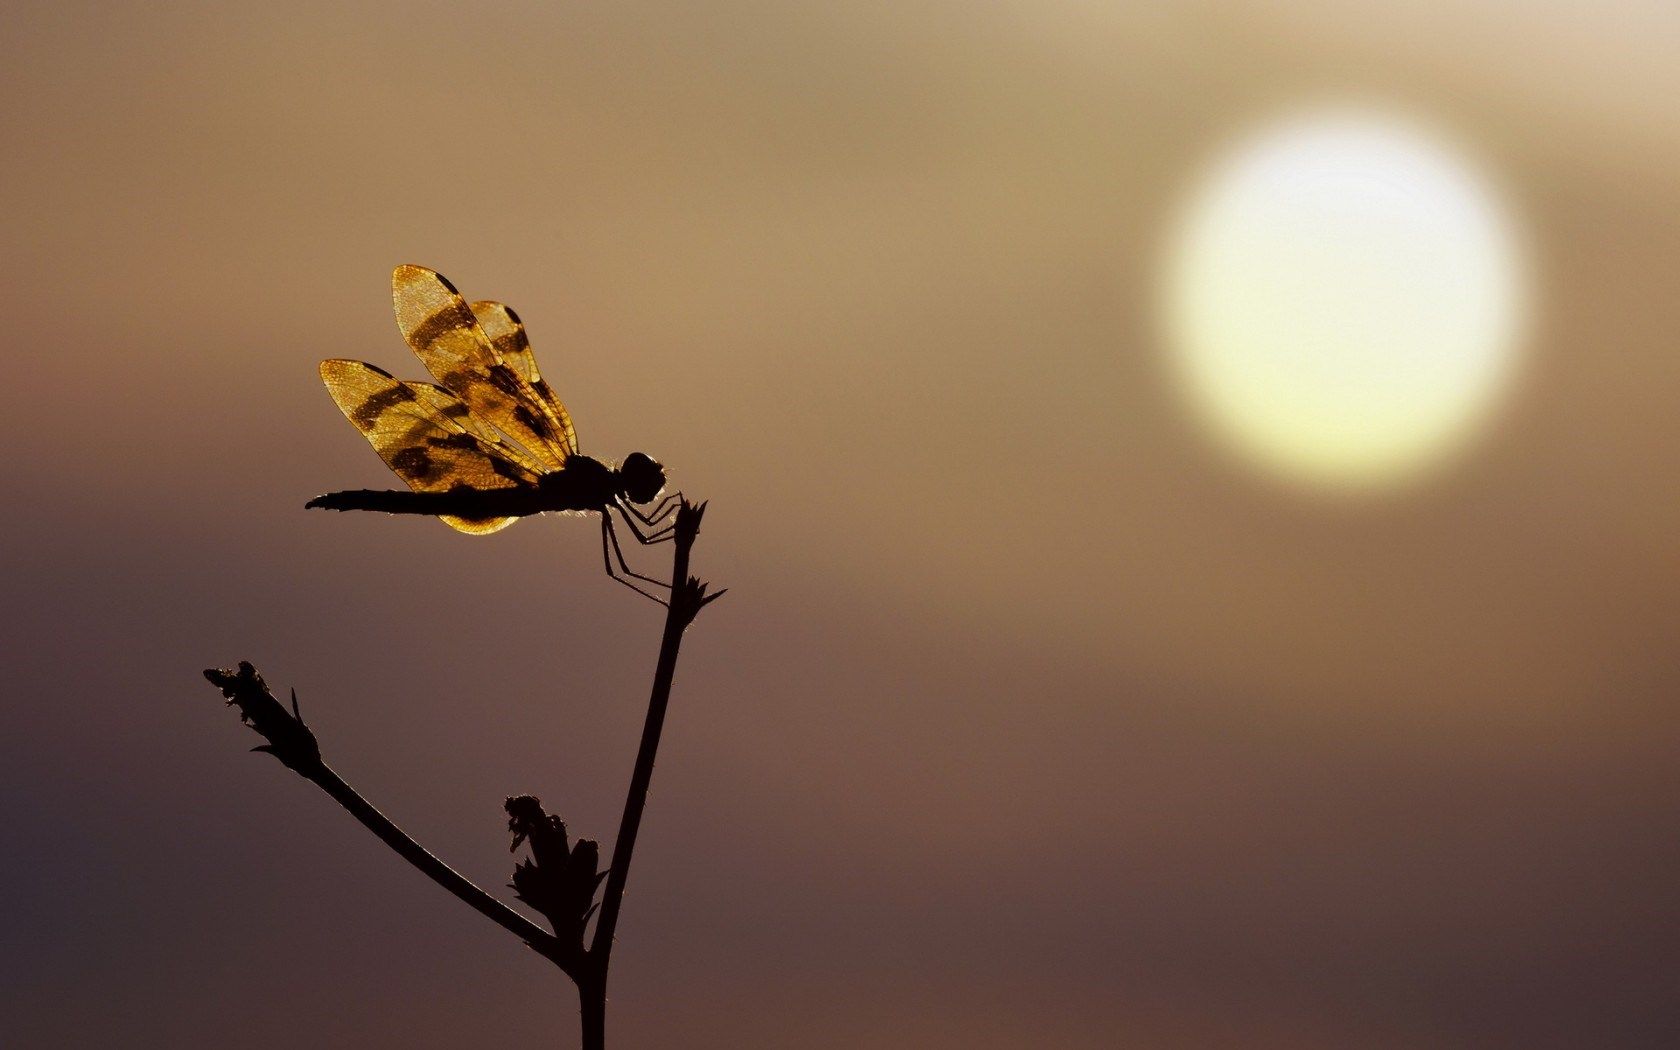 HD wallpaper, Sunset, Dragonfly, Silhouette